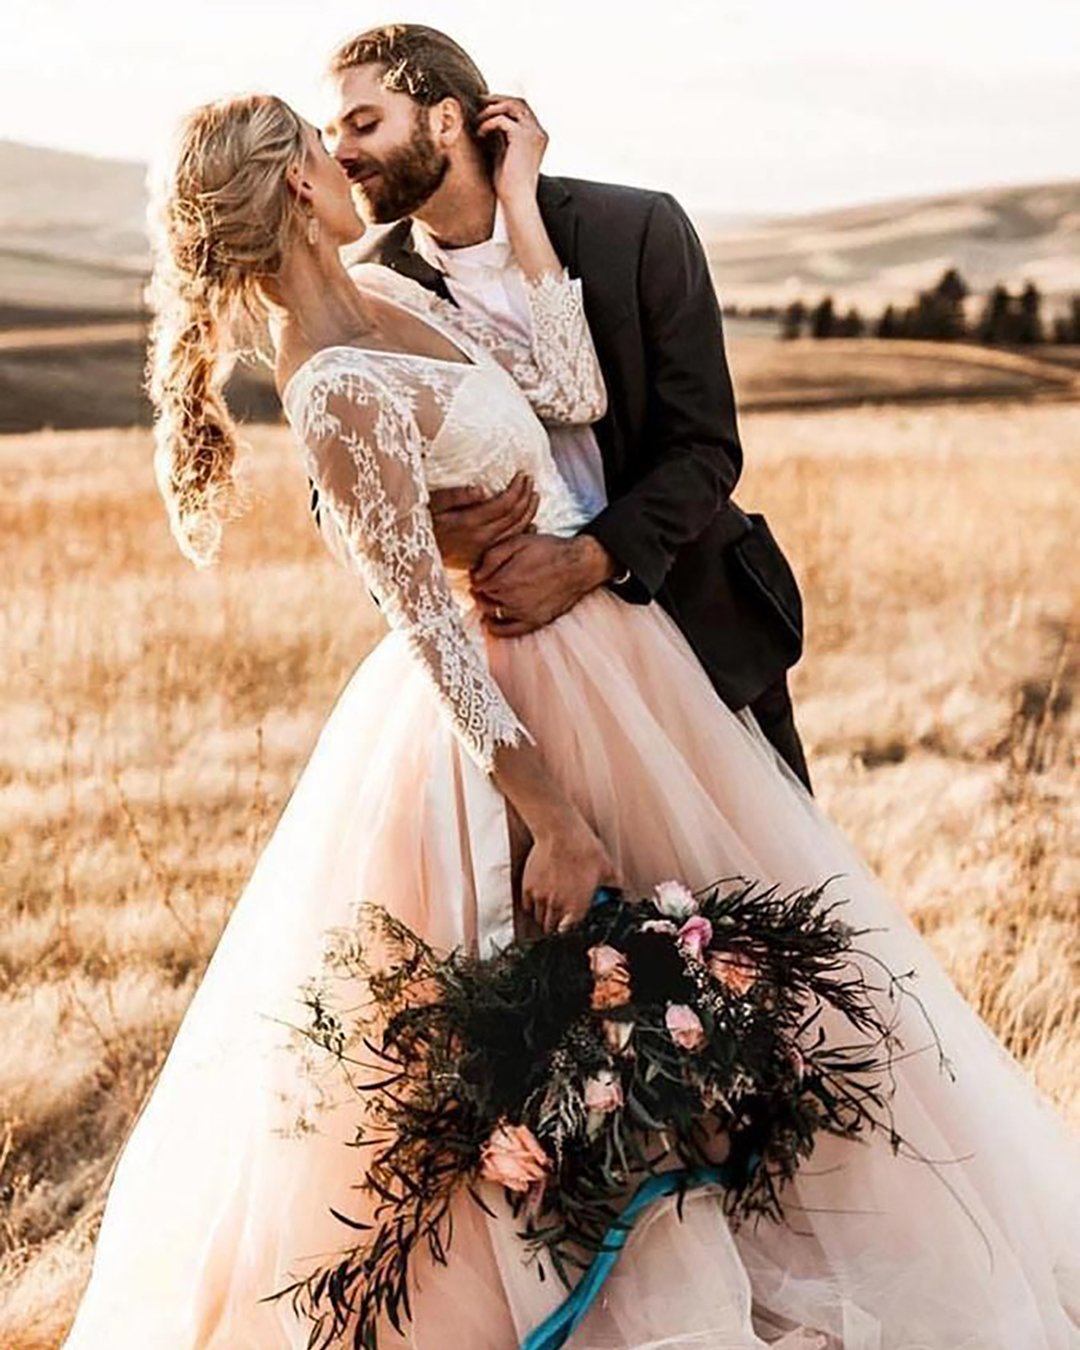 must have wedding photos kiss in field anasofia photography